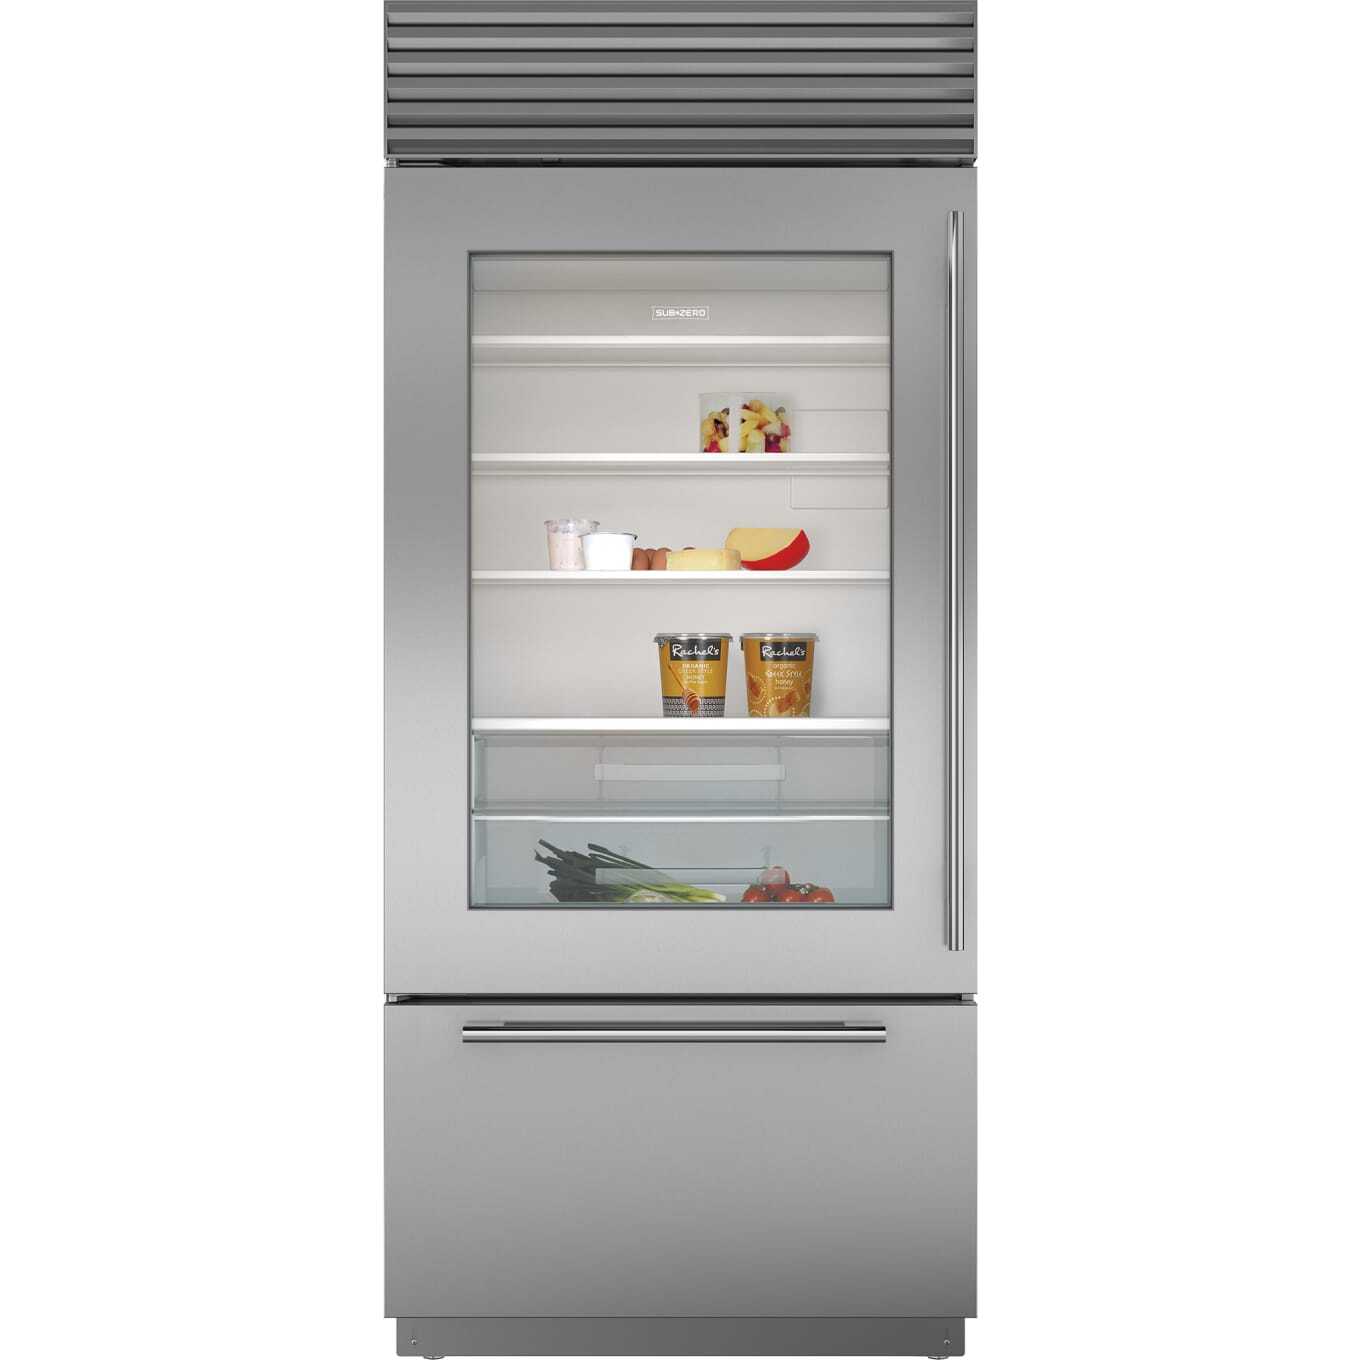 36 Inch Wide 21 Cu. Ft. Bottom Mount Refrigerator with Left Handed Door and Professional Style Handles